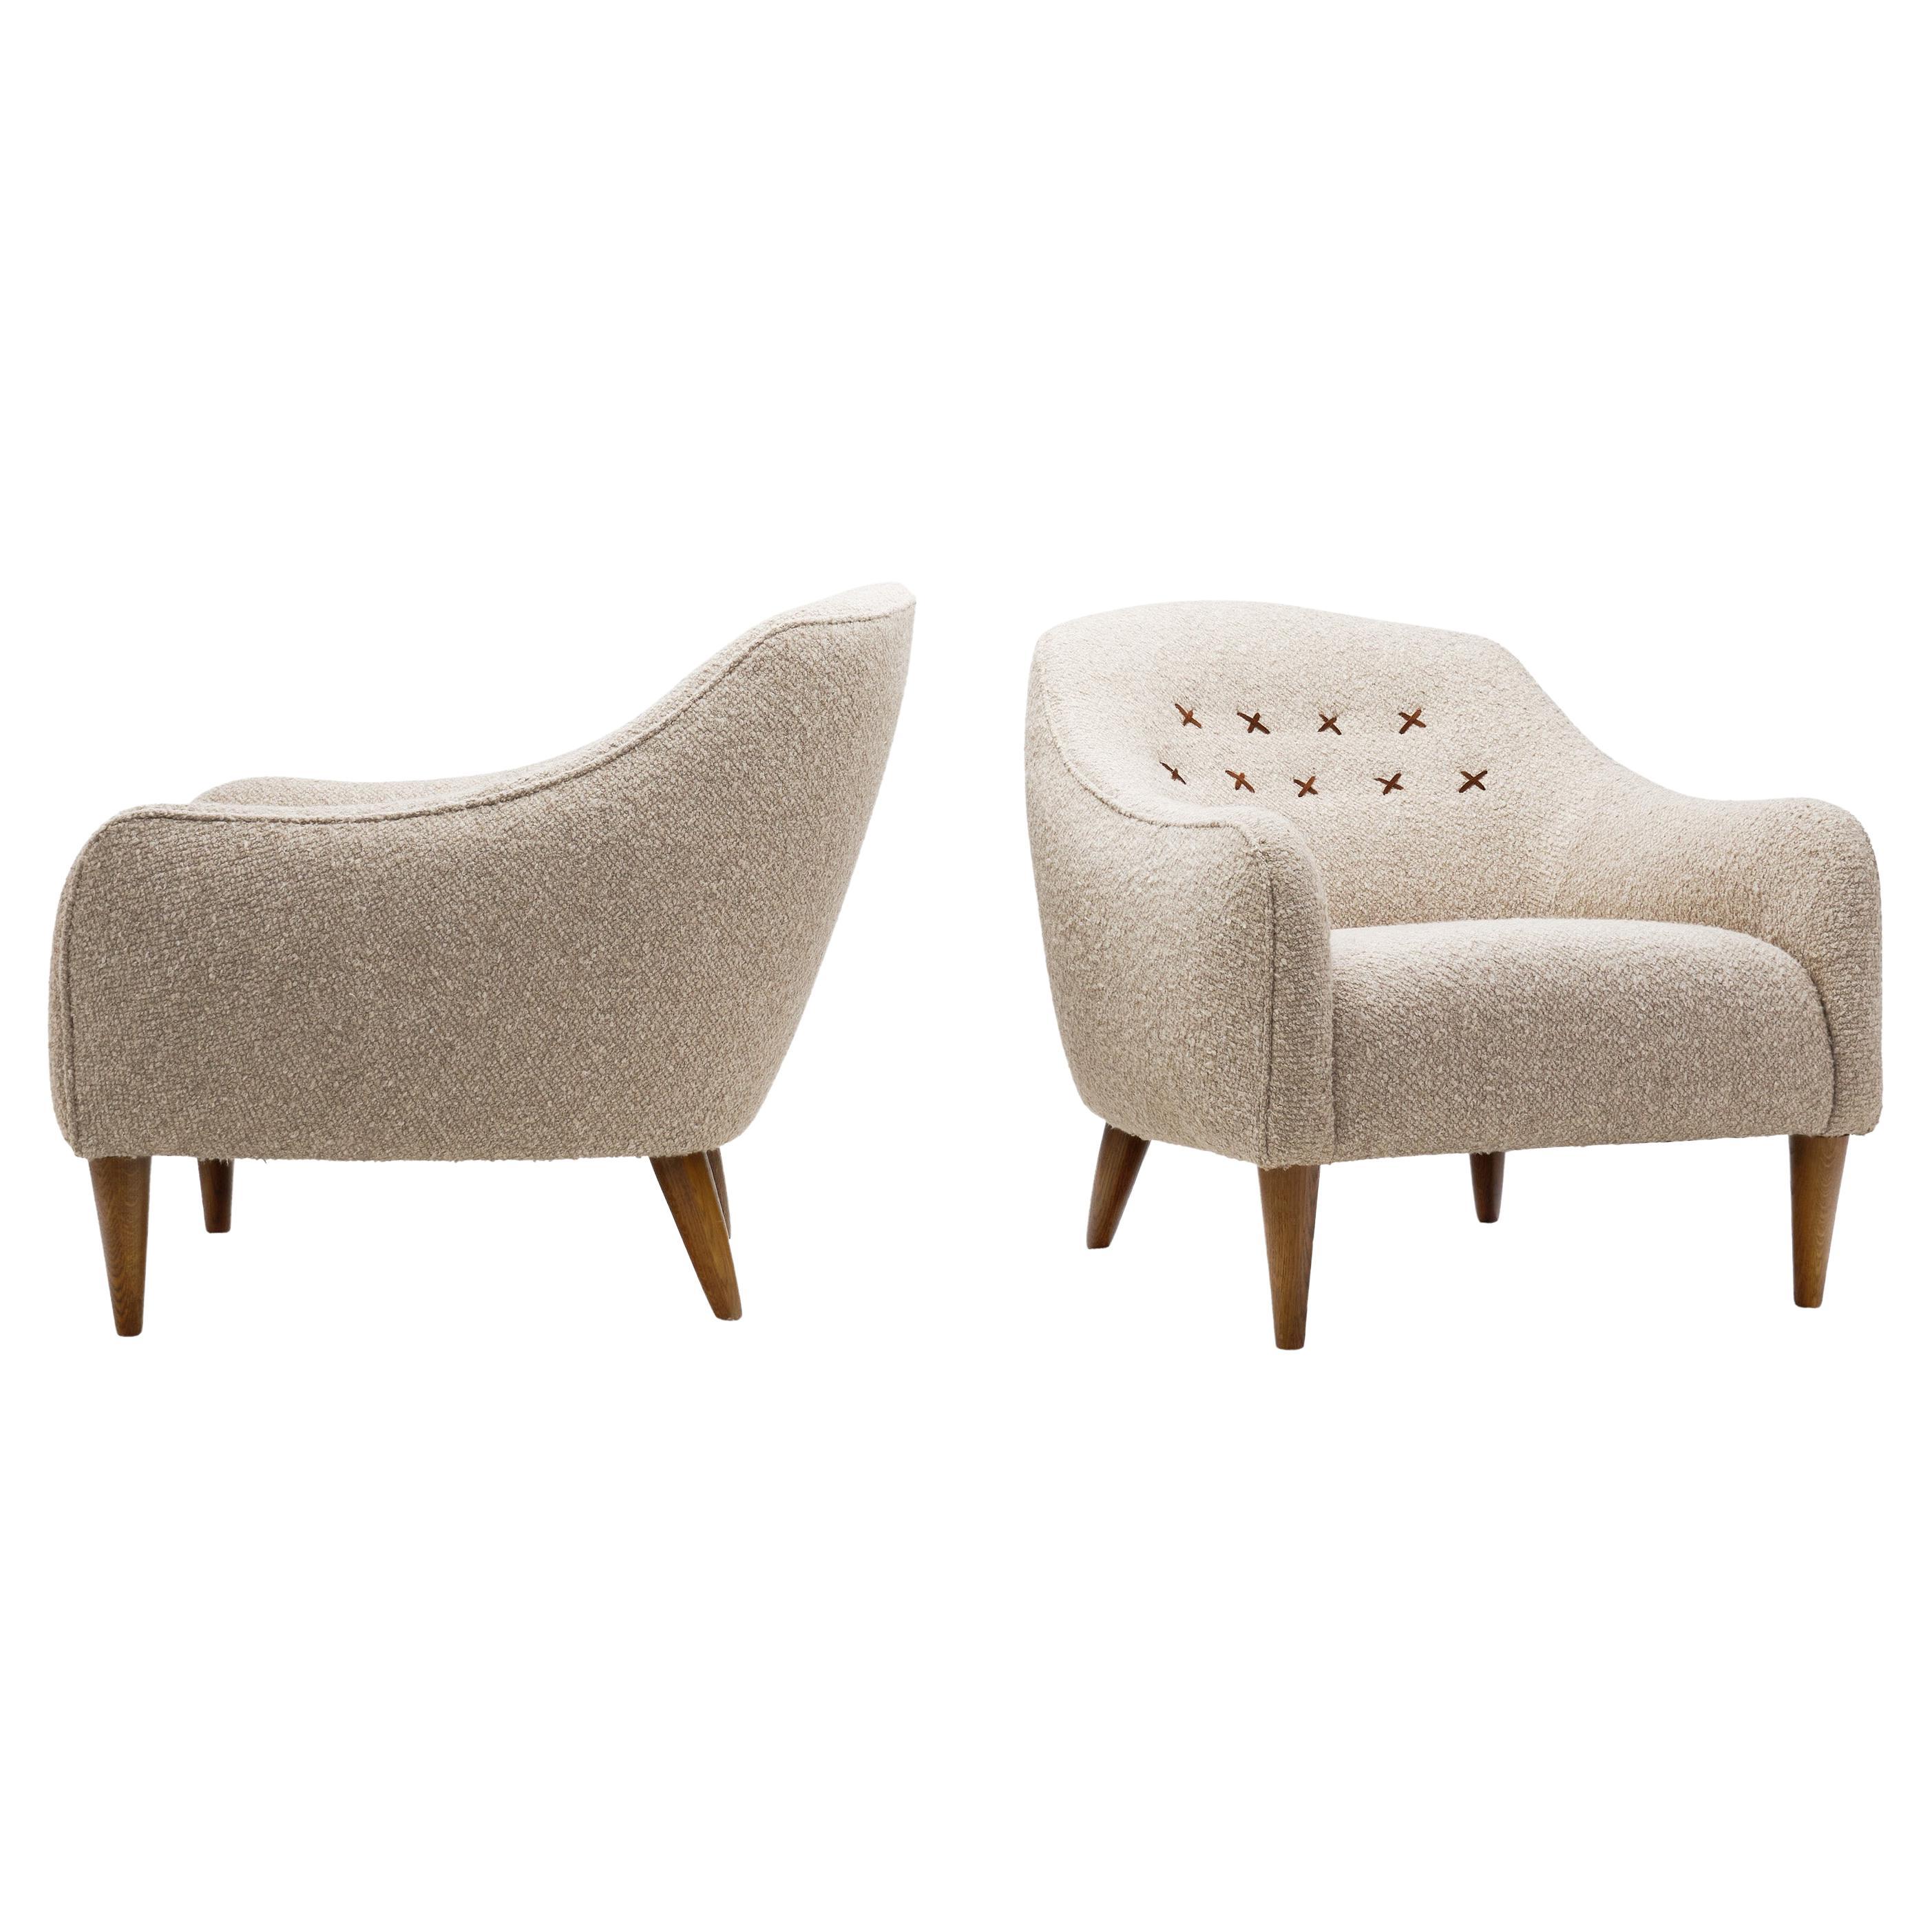 European Armchairs Upholstered in Bouclé Fabric, Europe Late 20th Century For Sale